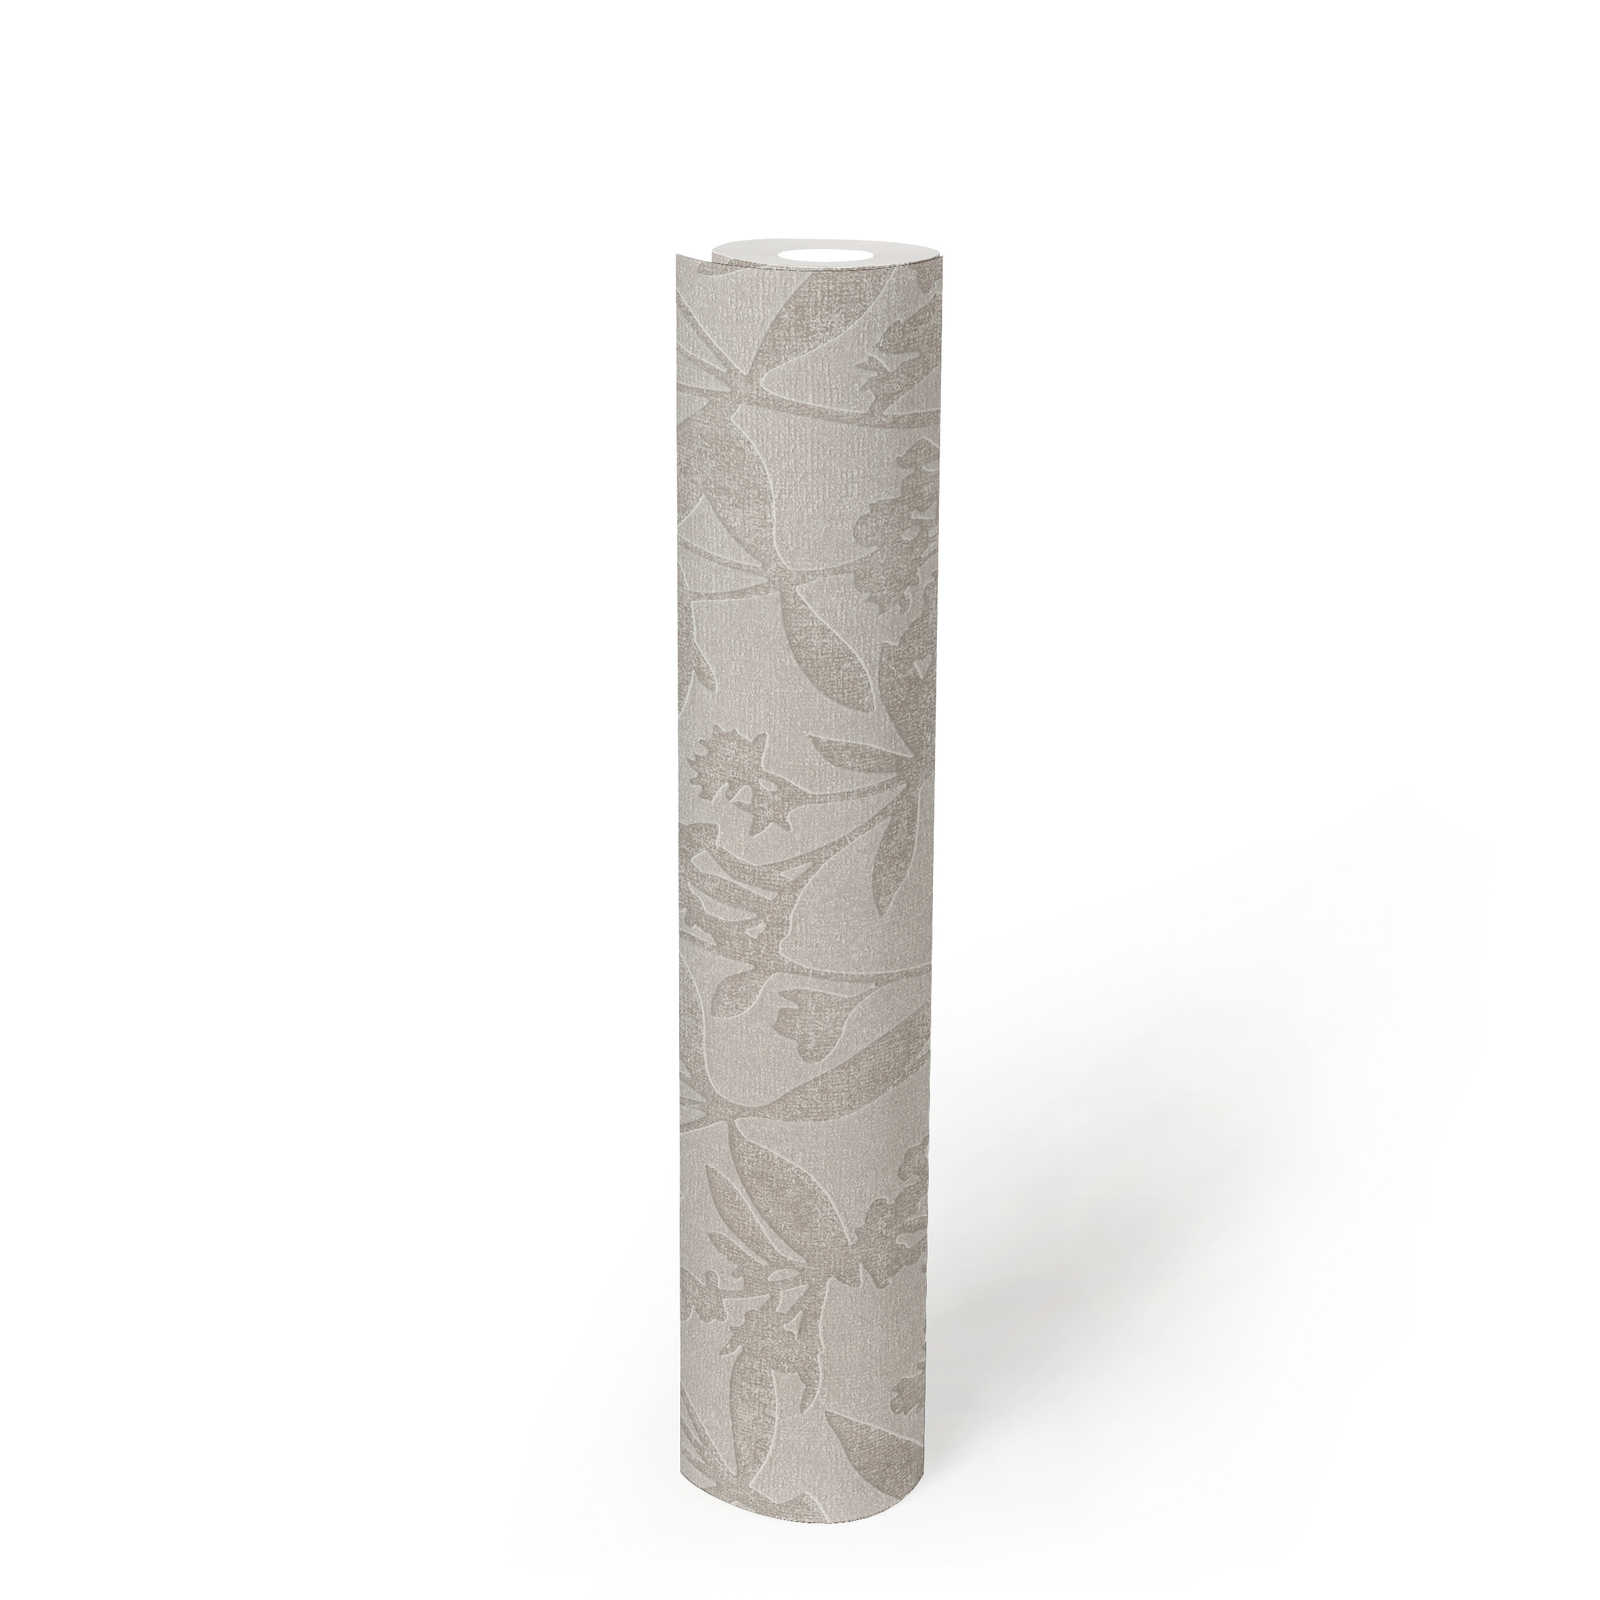             Non-woven wallpaper floral flowers and leaves - grey, beige
        